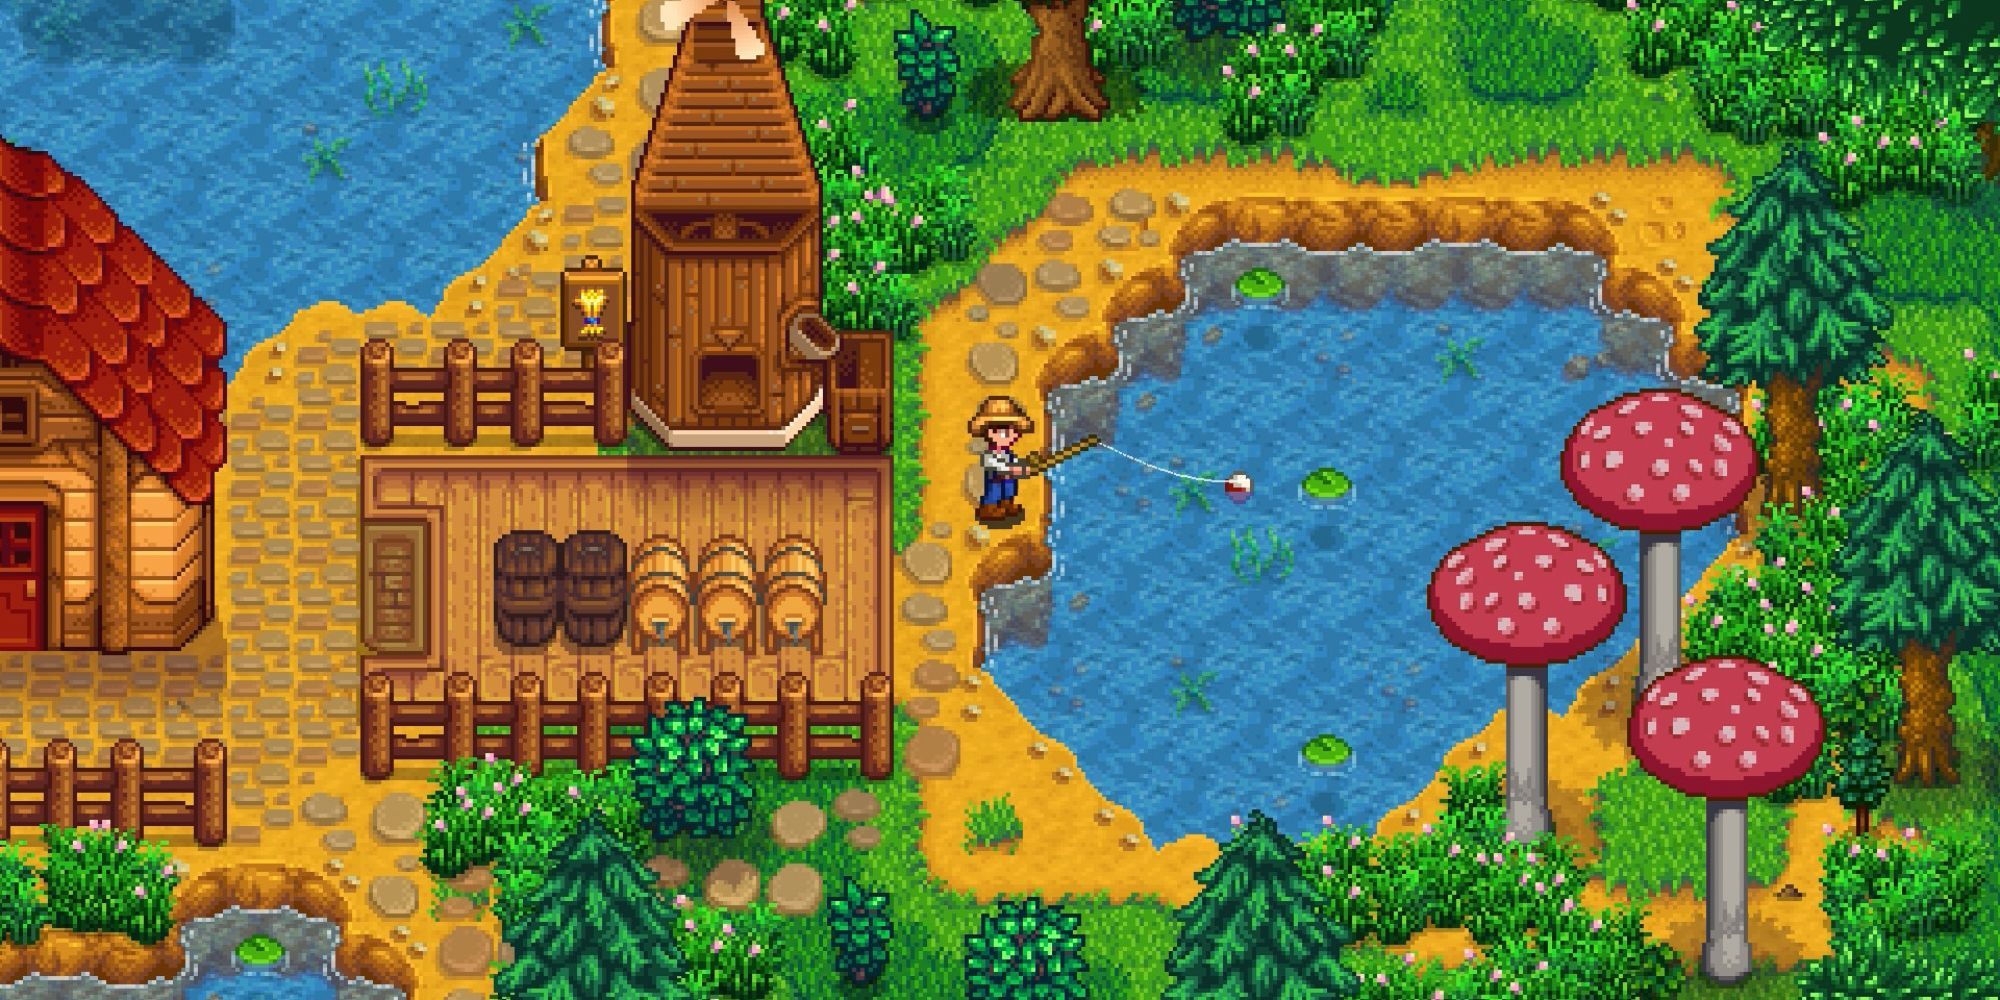 The protagonist of stardew Valley fishes in the pond by his house